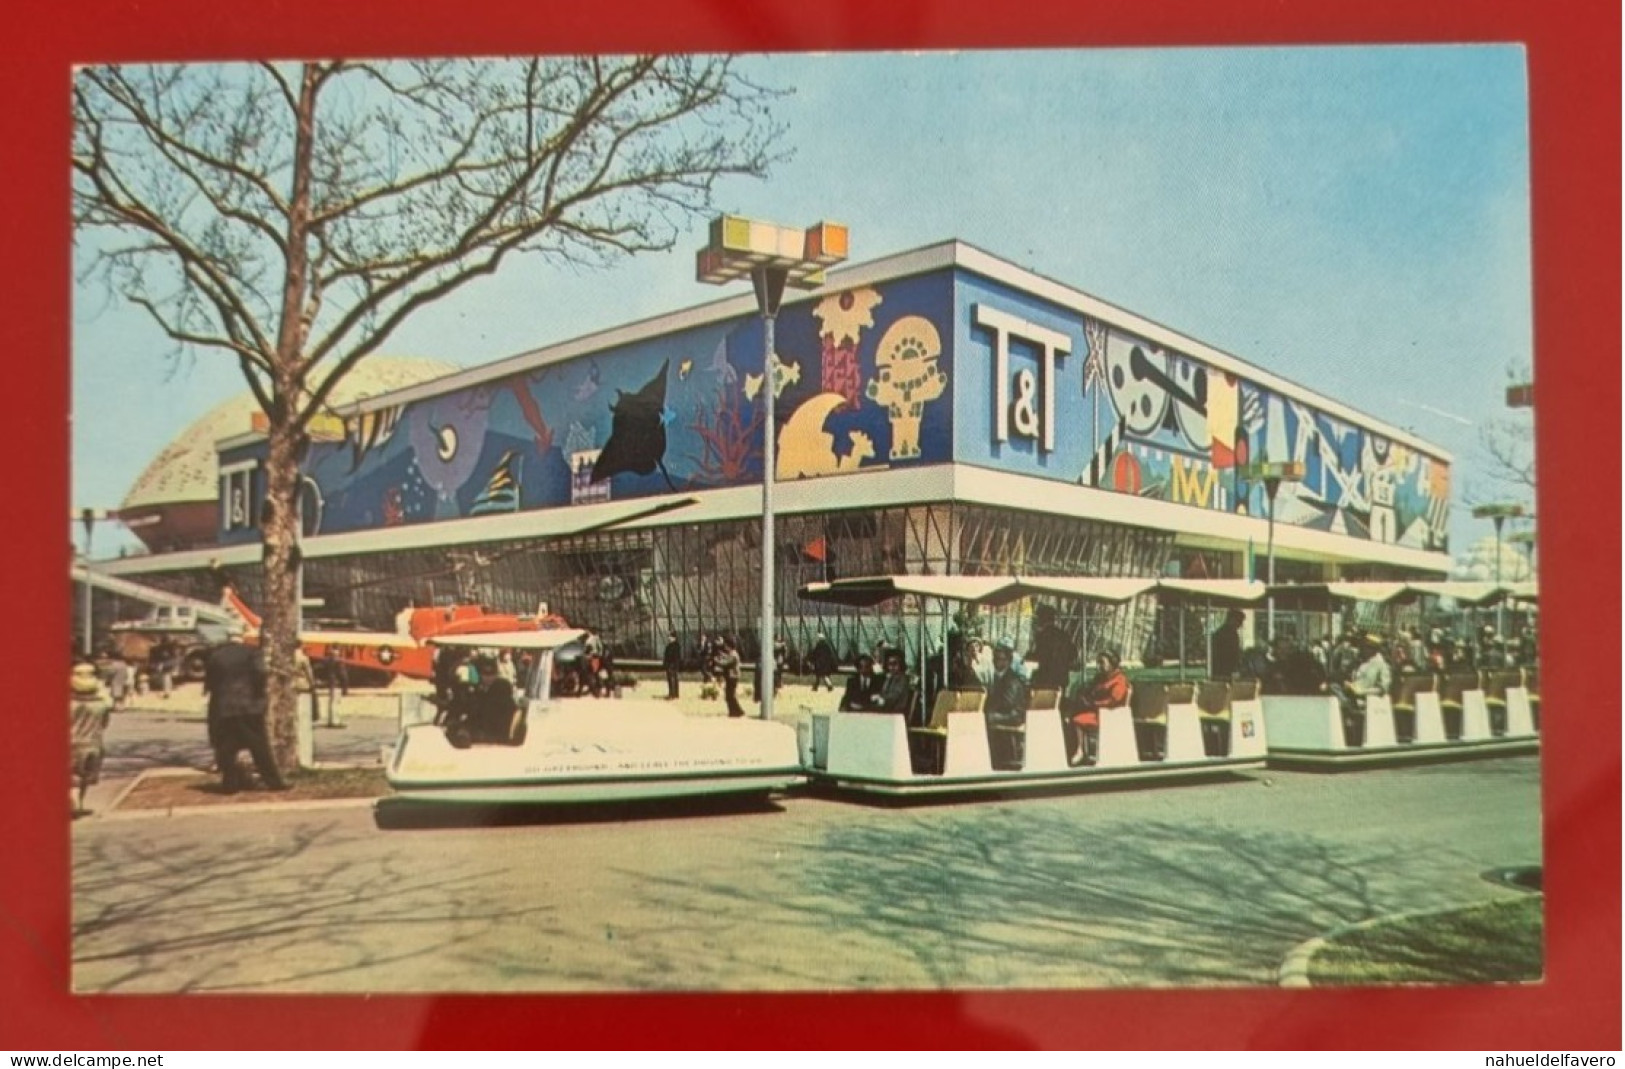 Uncirculated Postcard - USA - NY, NEW YORK WORLD'S FAIR 1964-65 - TRANSPORTATION AND TRAVEL PAVILION - Expositions